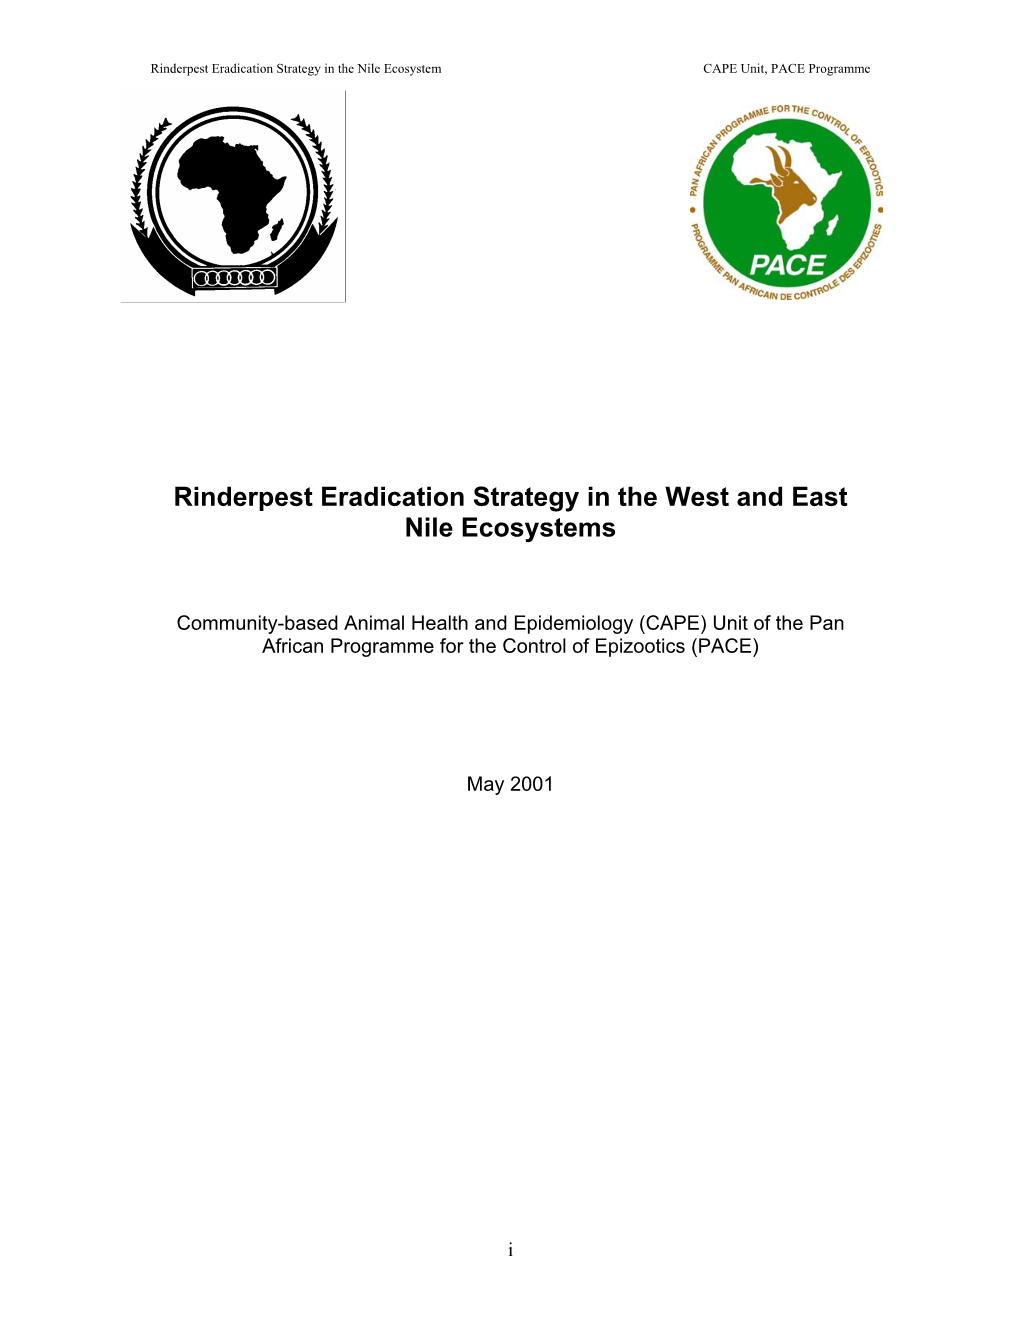 Rinderpest Eradication Strategy in the West and East Nile Ecosystems